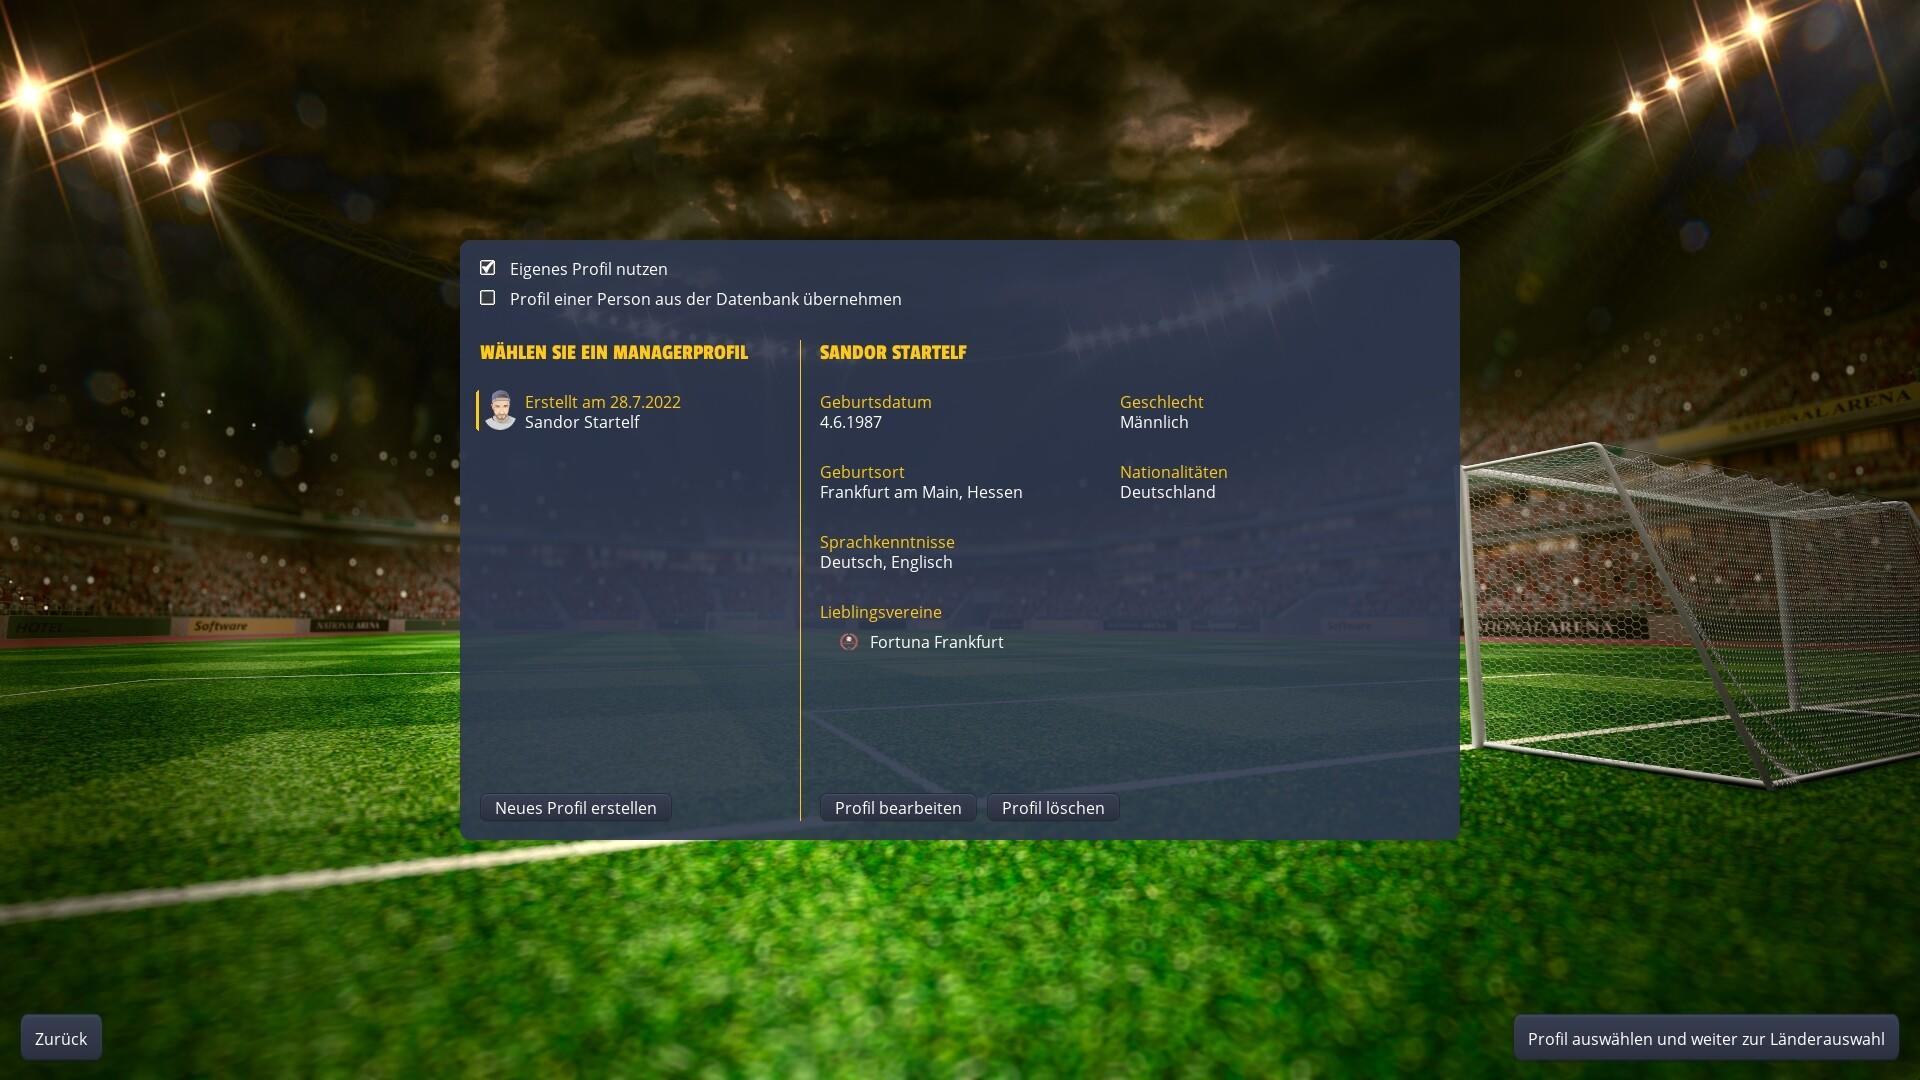 Screenshot of Player's Eleven - A Football Manager Game